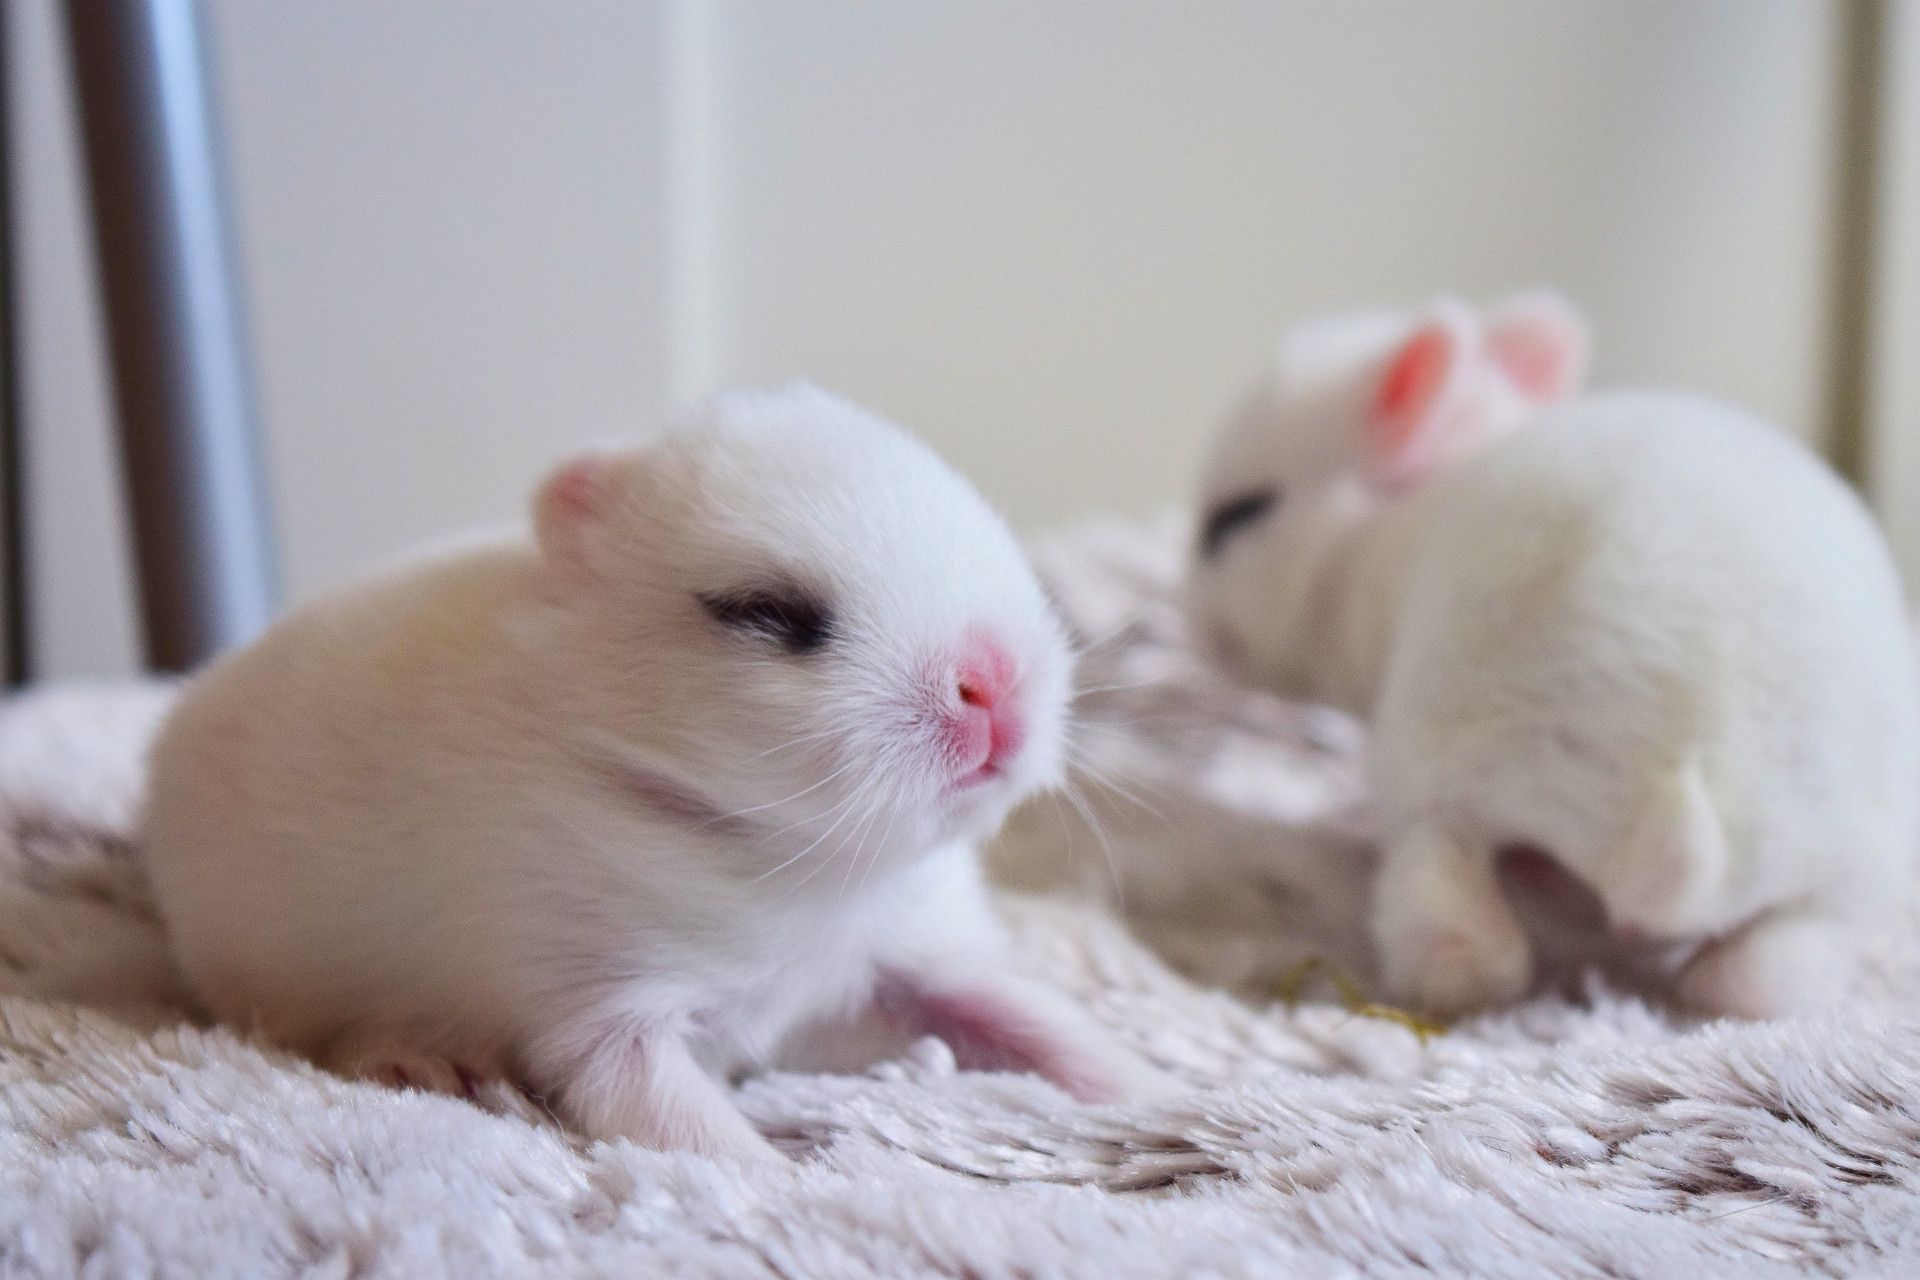 Why are rabbits born with their eyes closed?